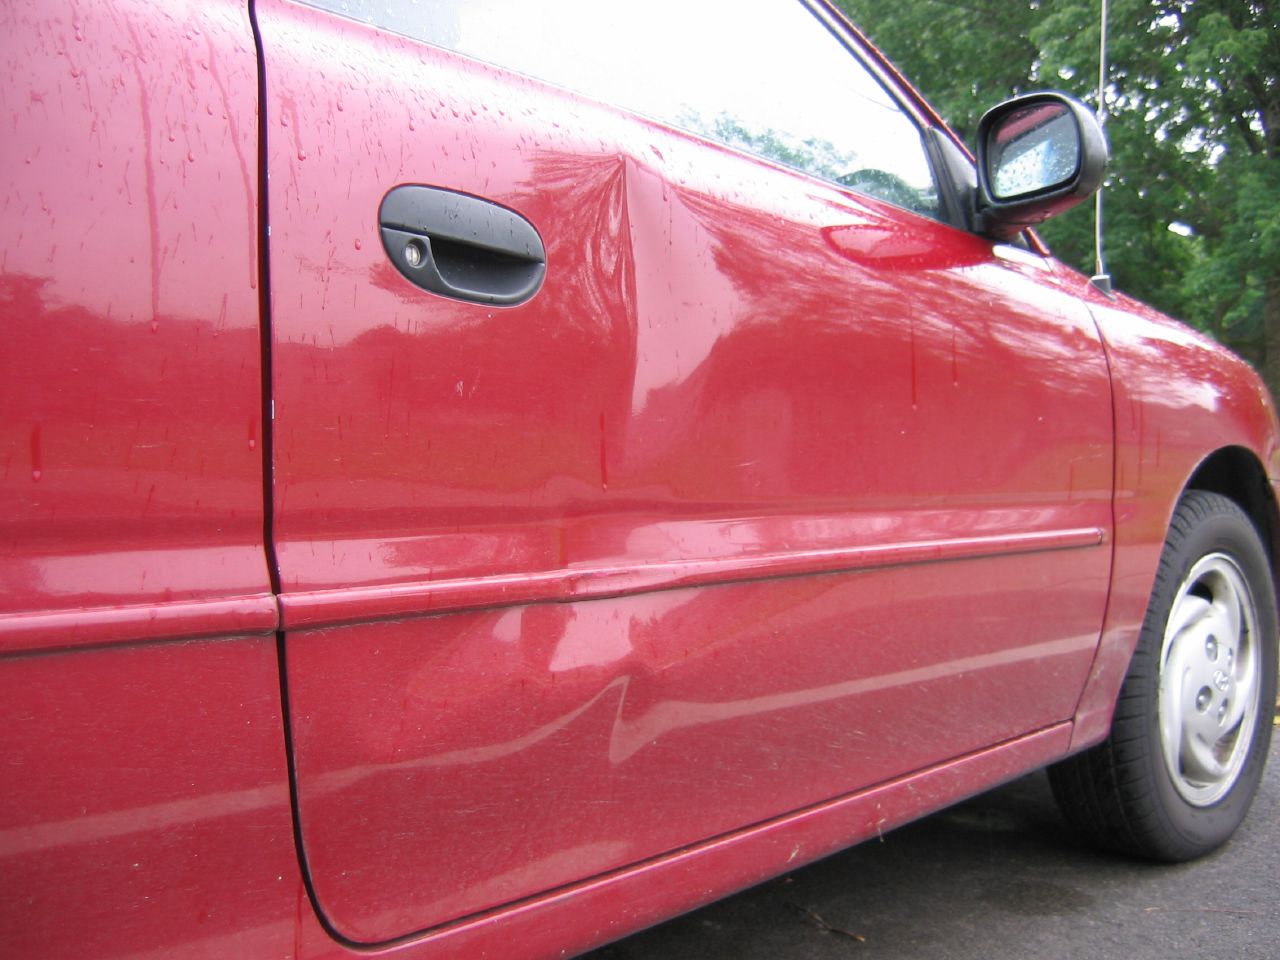 How To Fix A Dent In Your Car - Simplemost